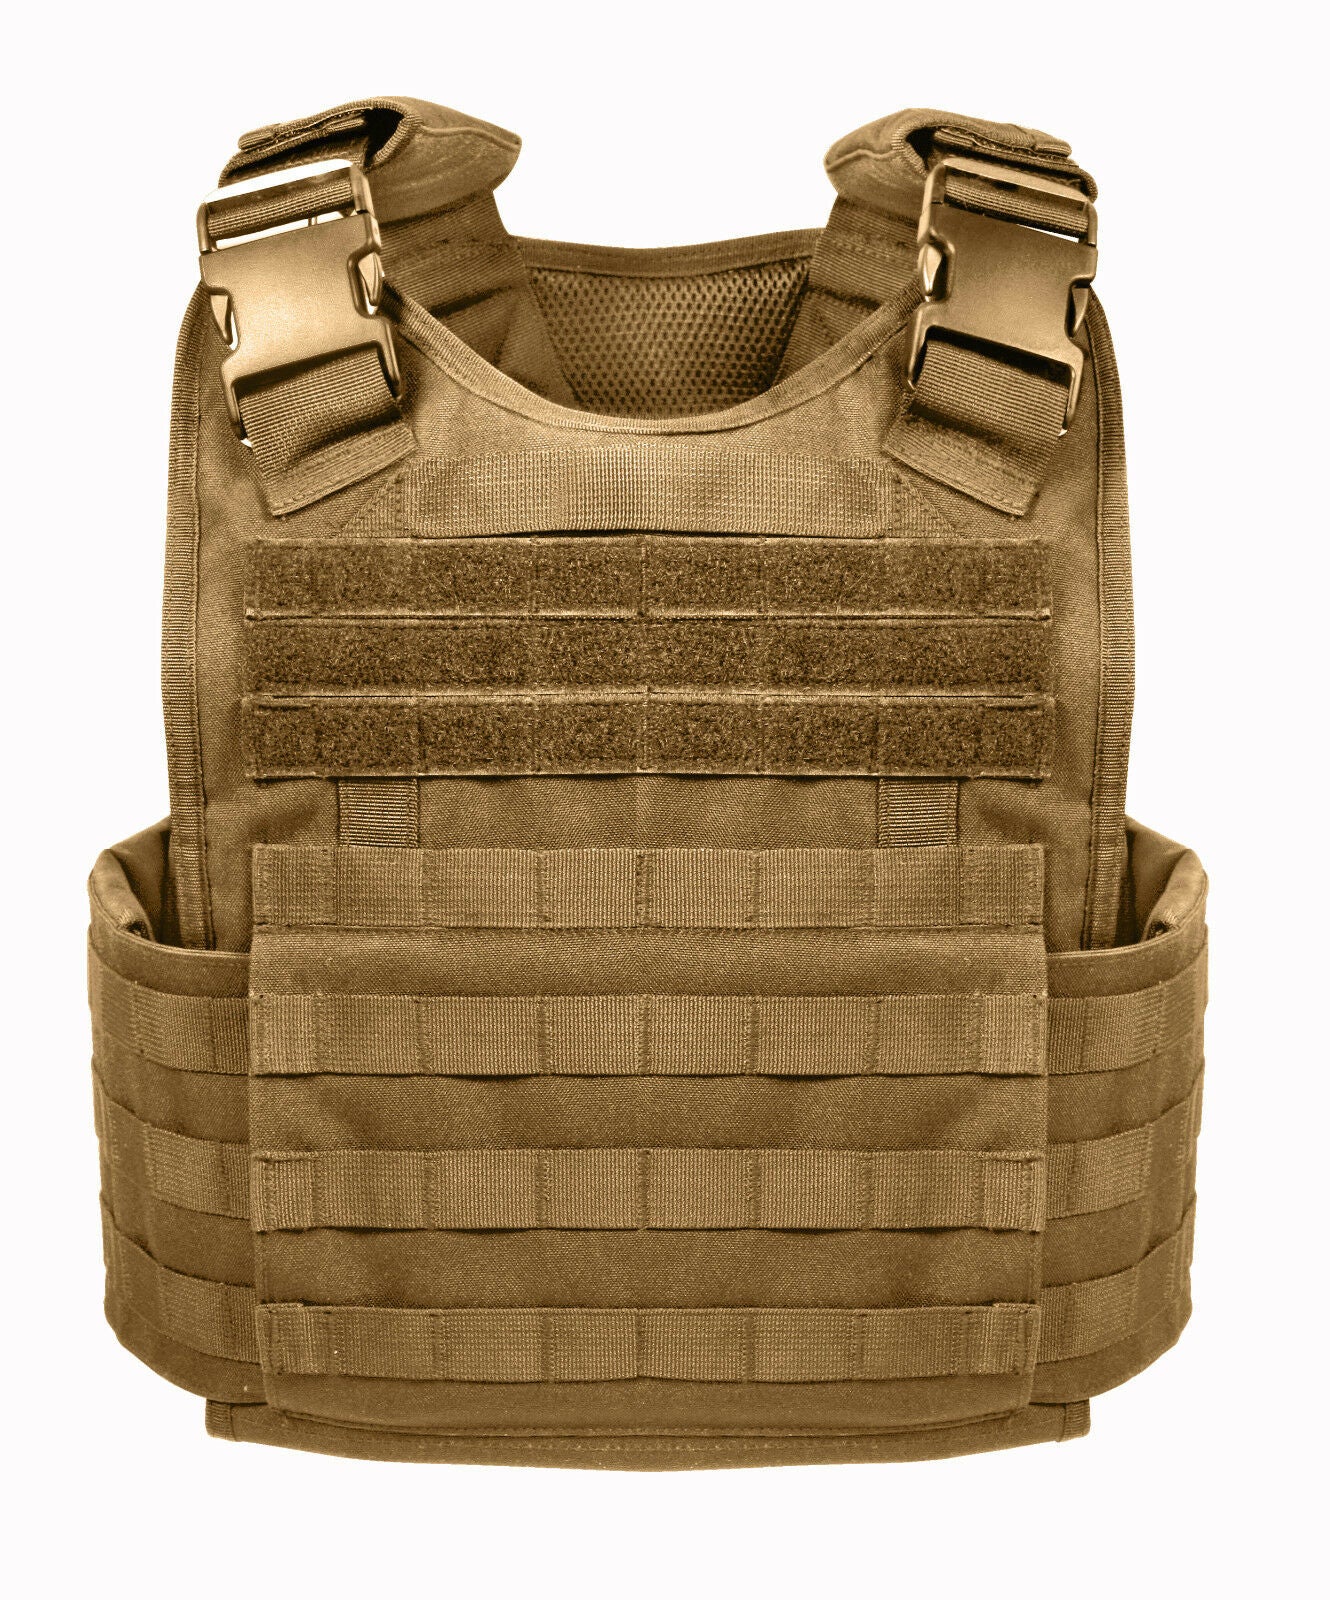 Rothco MOLLE Plate Carrier Vest Regular and Small Sizes